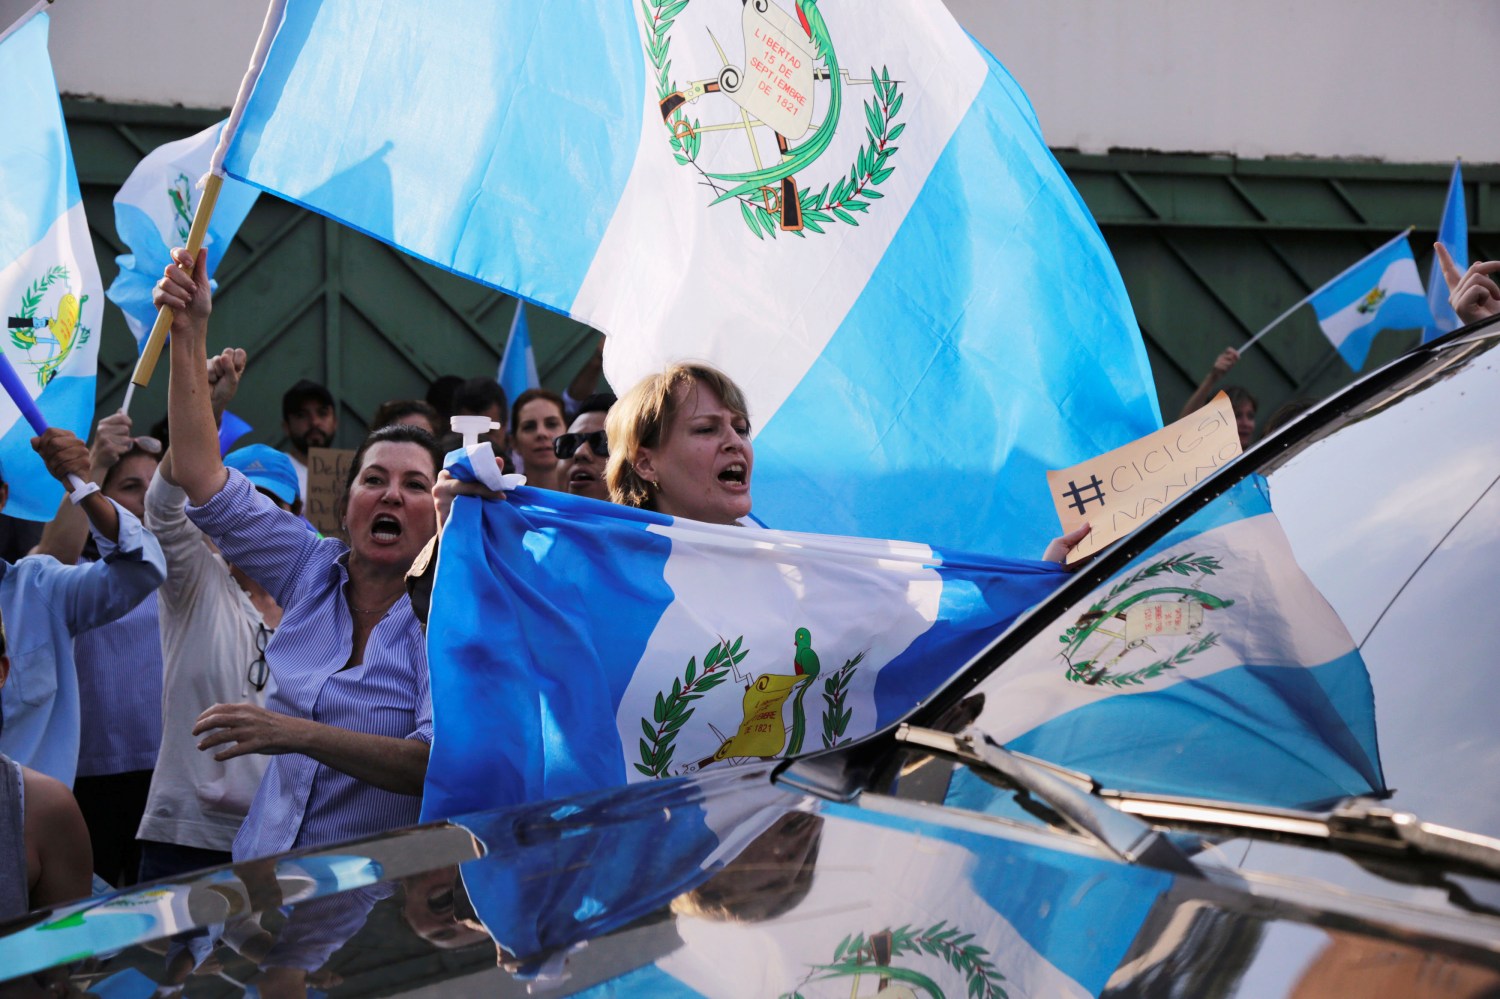 A demonstrator reacts against a car leaving from the Guatemalas's International Commission Against Impunity (CICIG) headquarters as she protests in support of Guatemalan President Jimmy Morales and his decision to expel Ivan Velasquez, head of CICIG, outside the CICIG headquarters in Guatemala City, Guatemala, August 27, 2017. REUTERS/Luis Echeverria - RC16CC075790